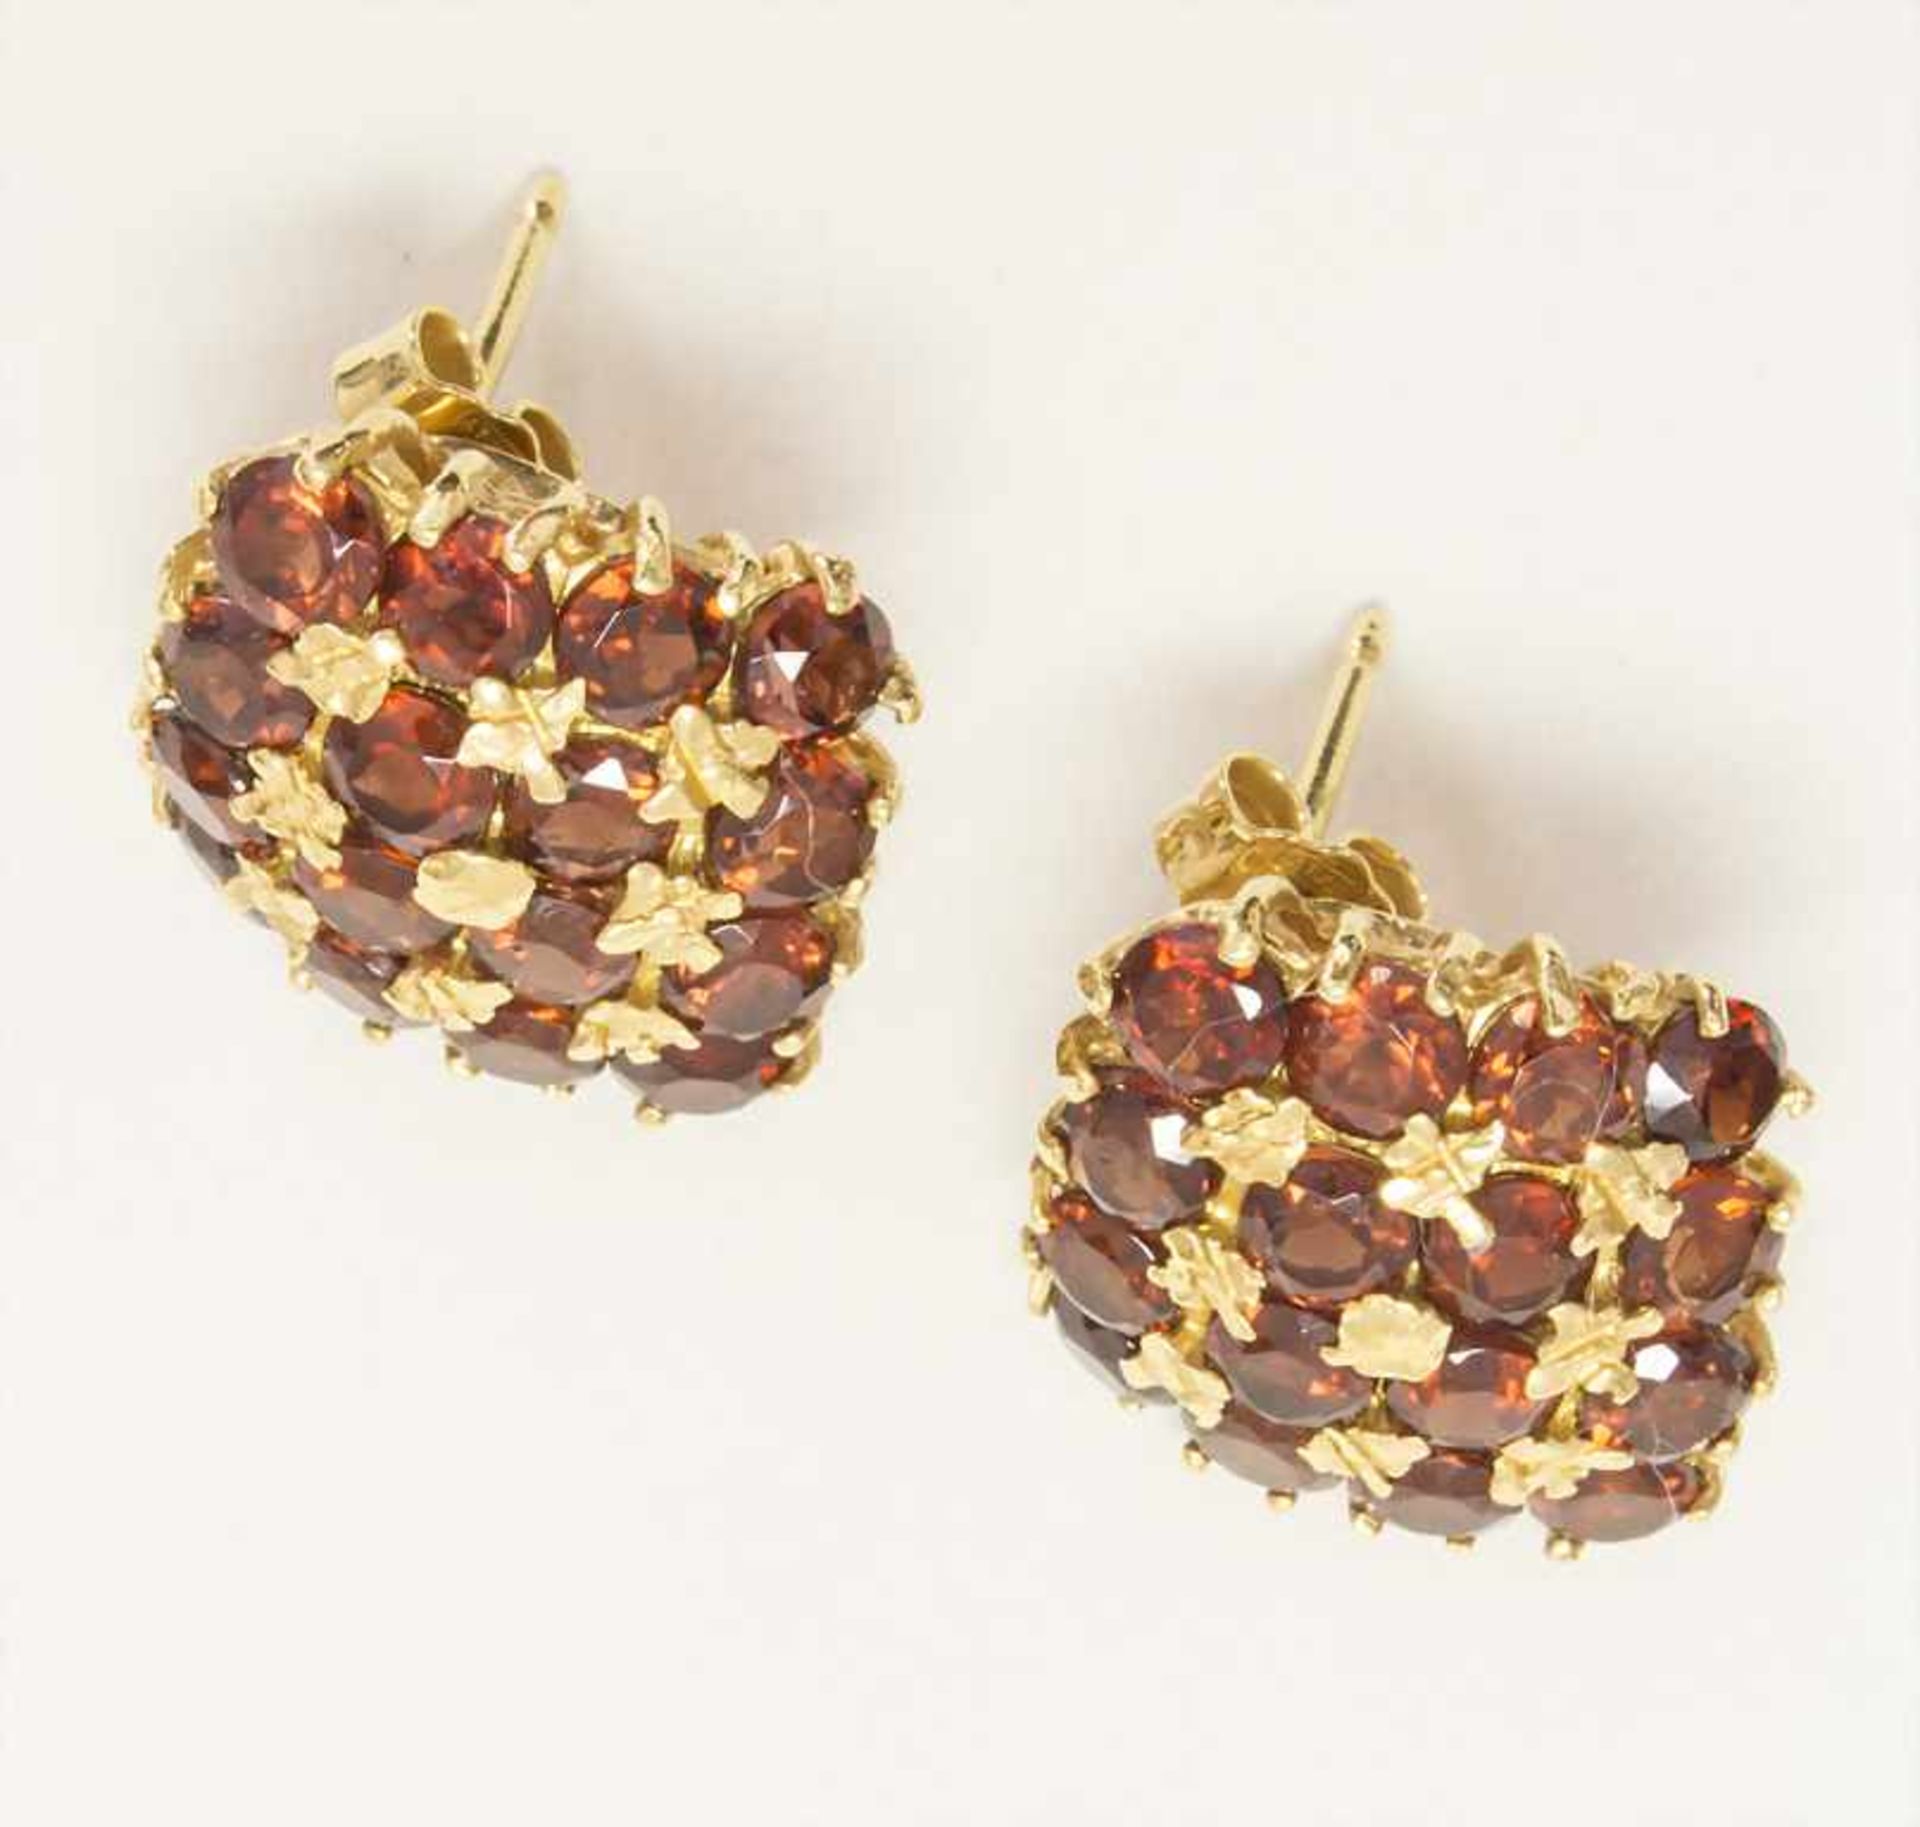 Paar Ohrstecker mit Granat / A pair of earrings with garnetMaterial: Gelbgold Au 585/000 14 Kt,